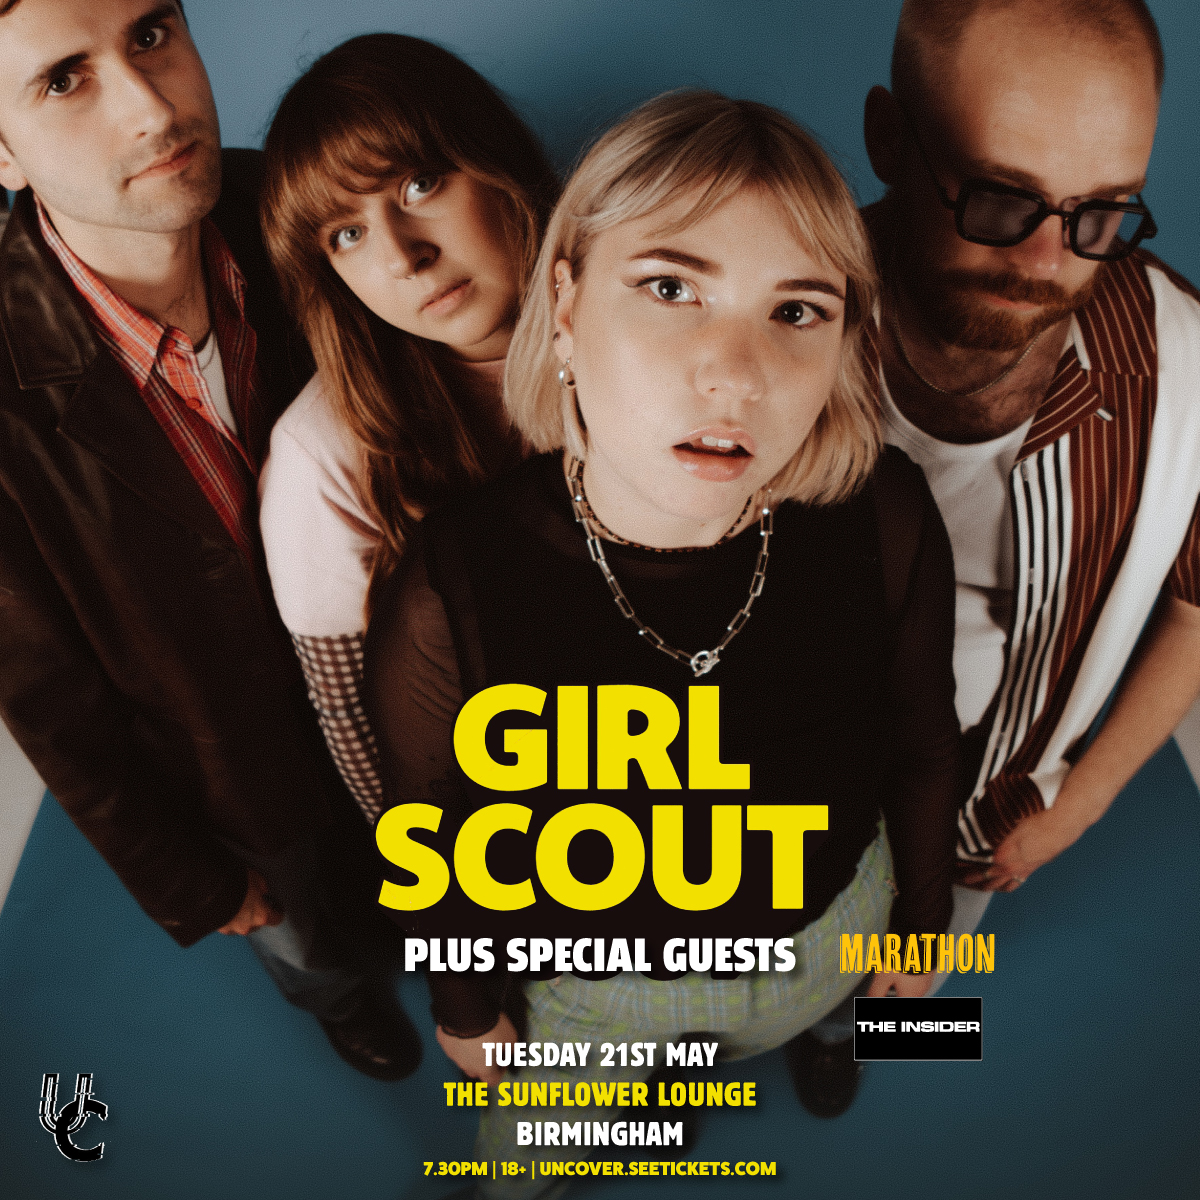 LINE UP ANNOUNCEMENT 💙 Marathon and The Insider are set to join Girl Scout when they headline @Sunflowerlounge on Tuesday, 21st May 💥 Tickets on sale now: bit.ly/3ts6VtG